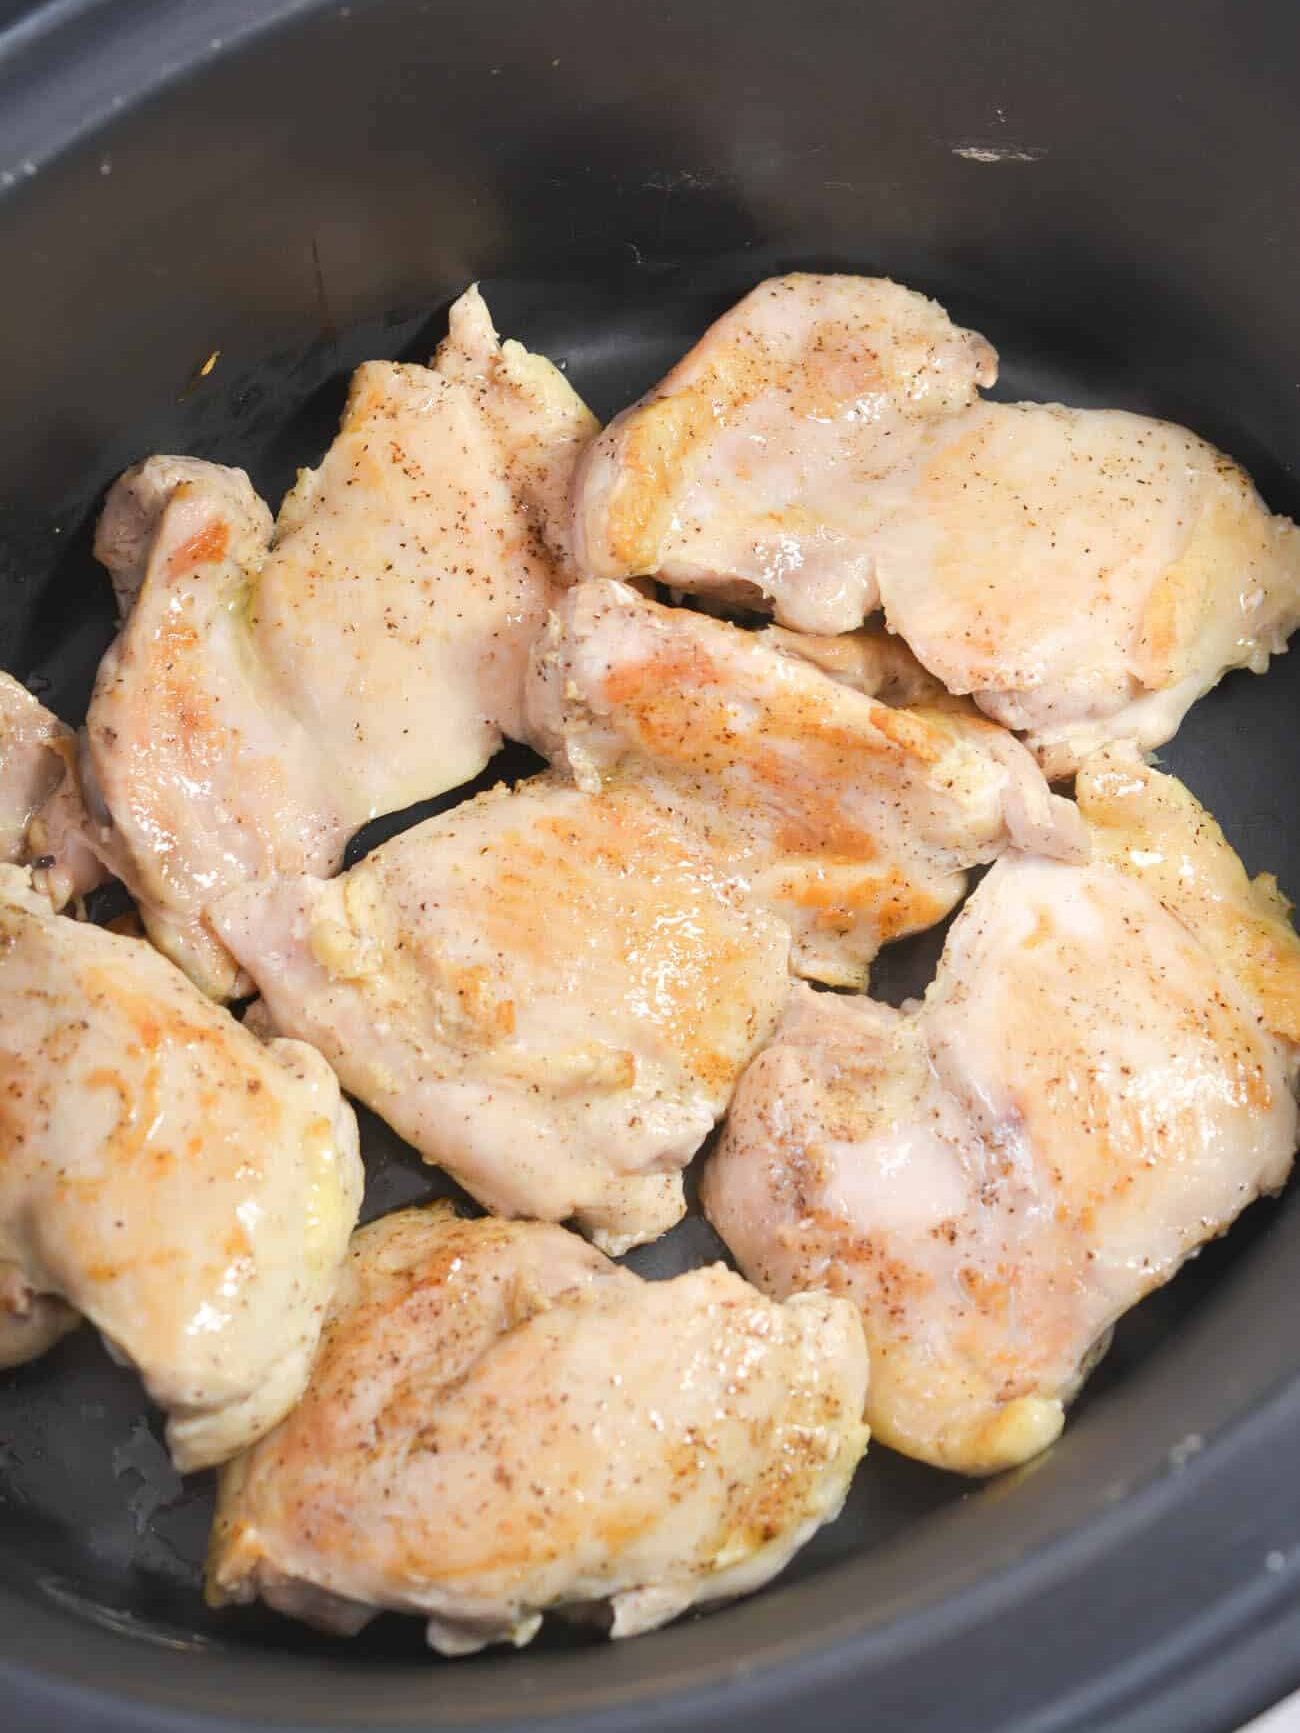 Place the seared chicken into the Crockpot.